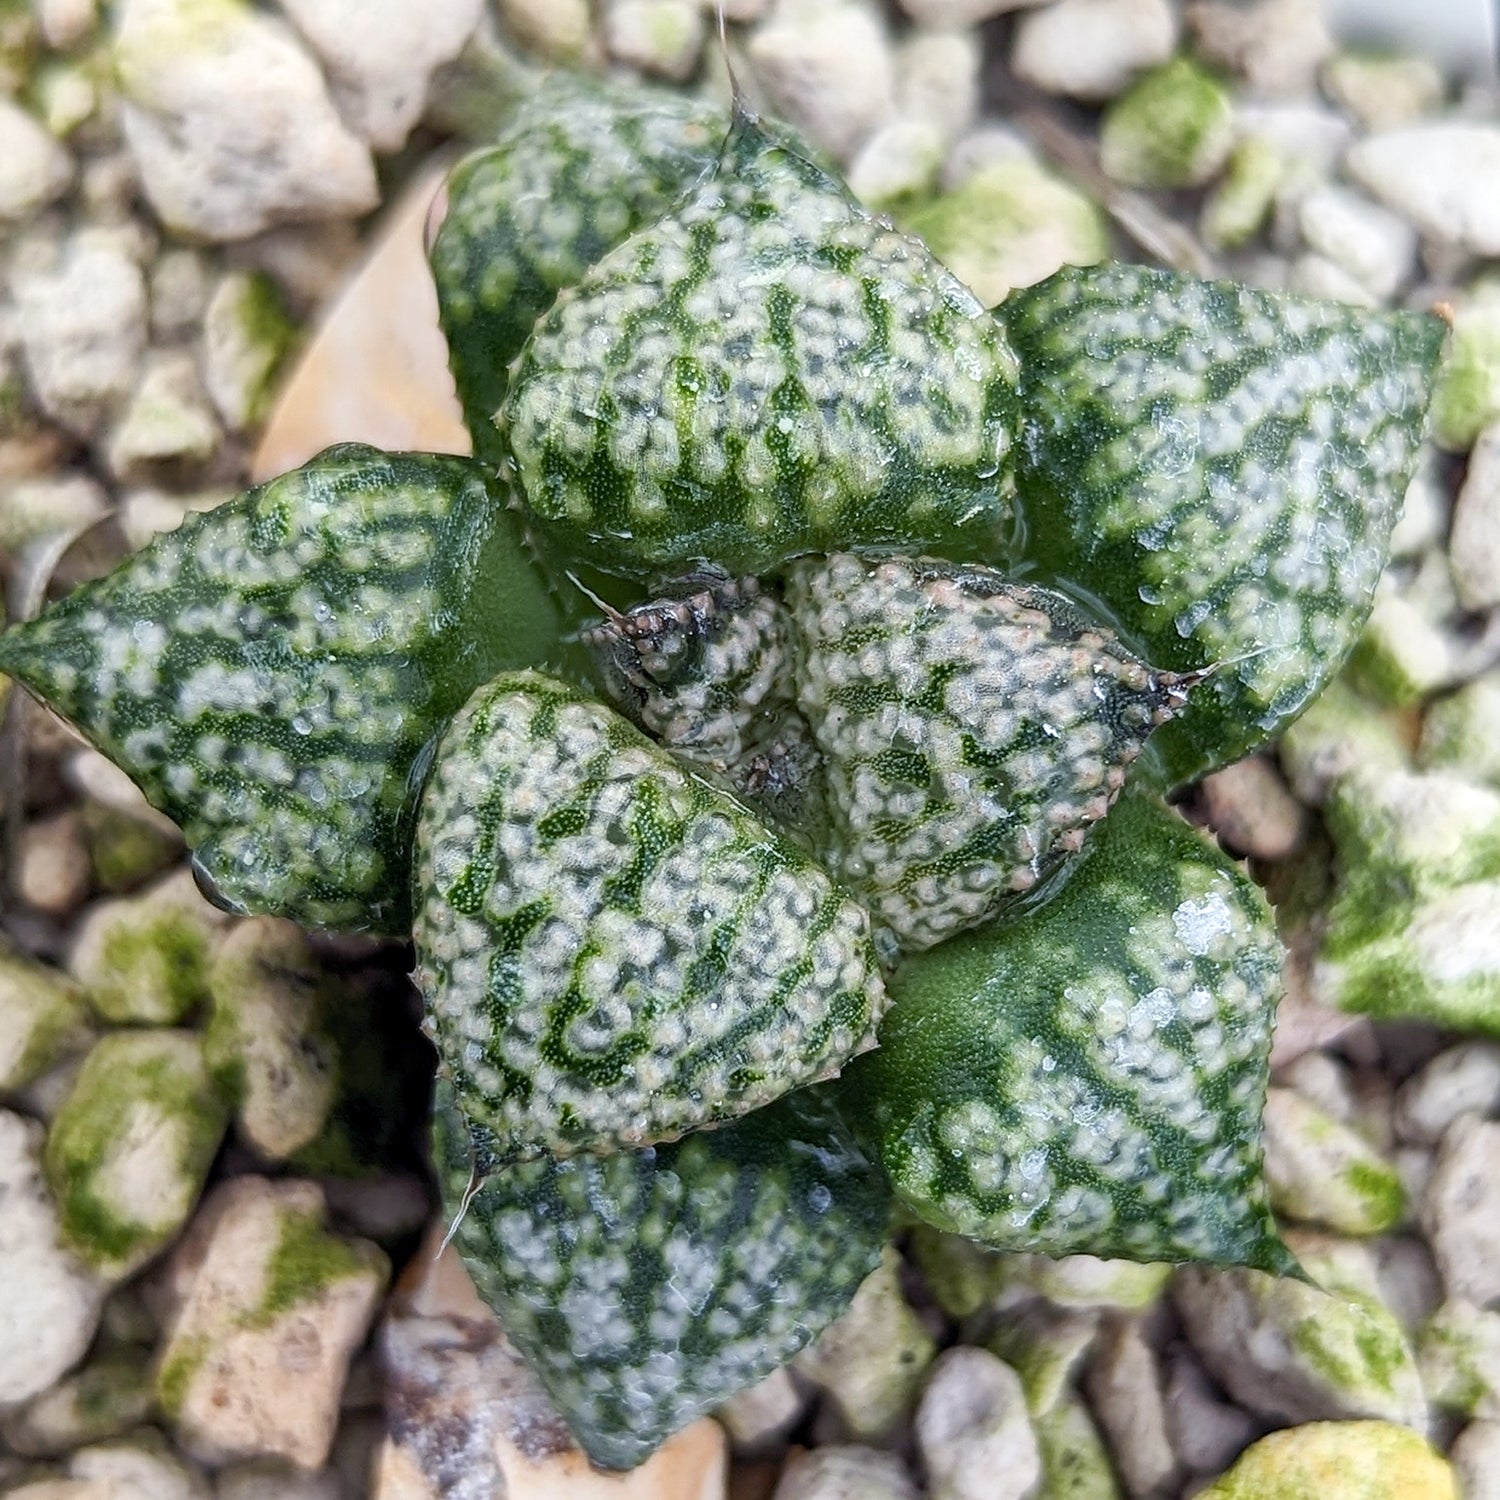 Haworthia "PP331" picta x Empress hybrid series #9 SOLD OUT